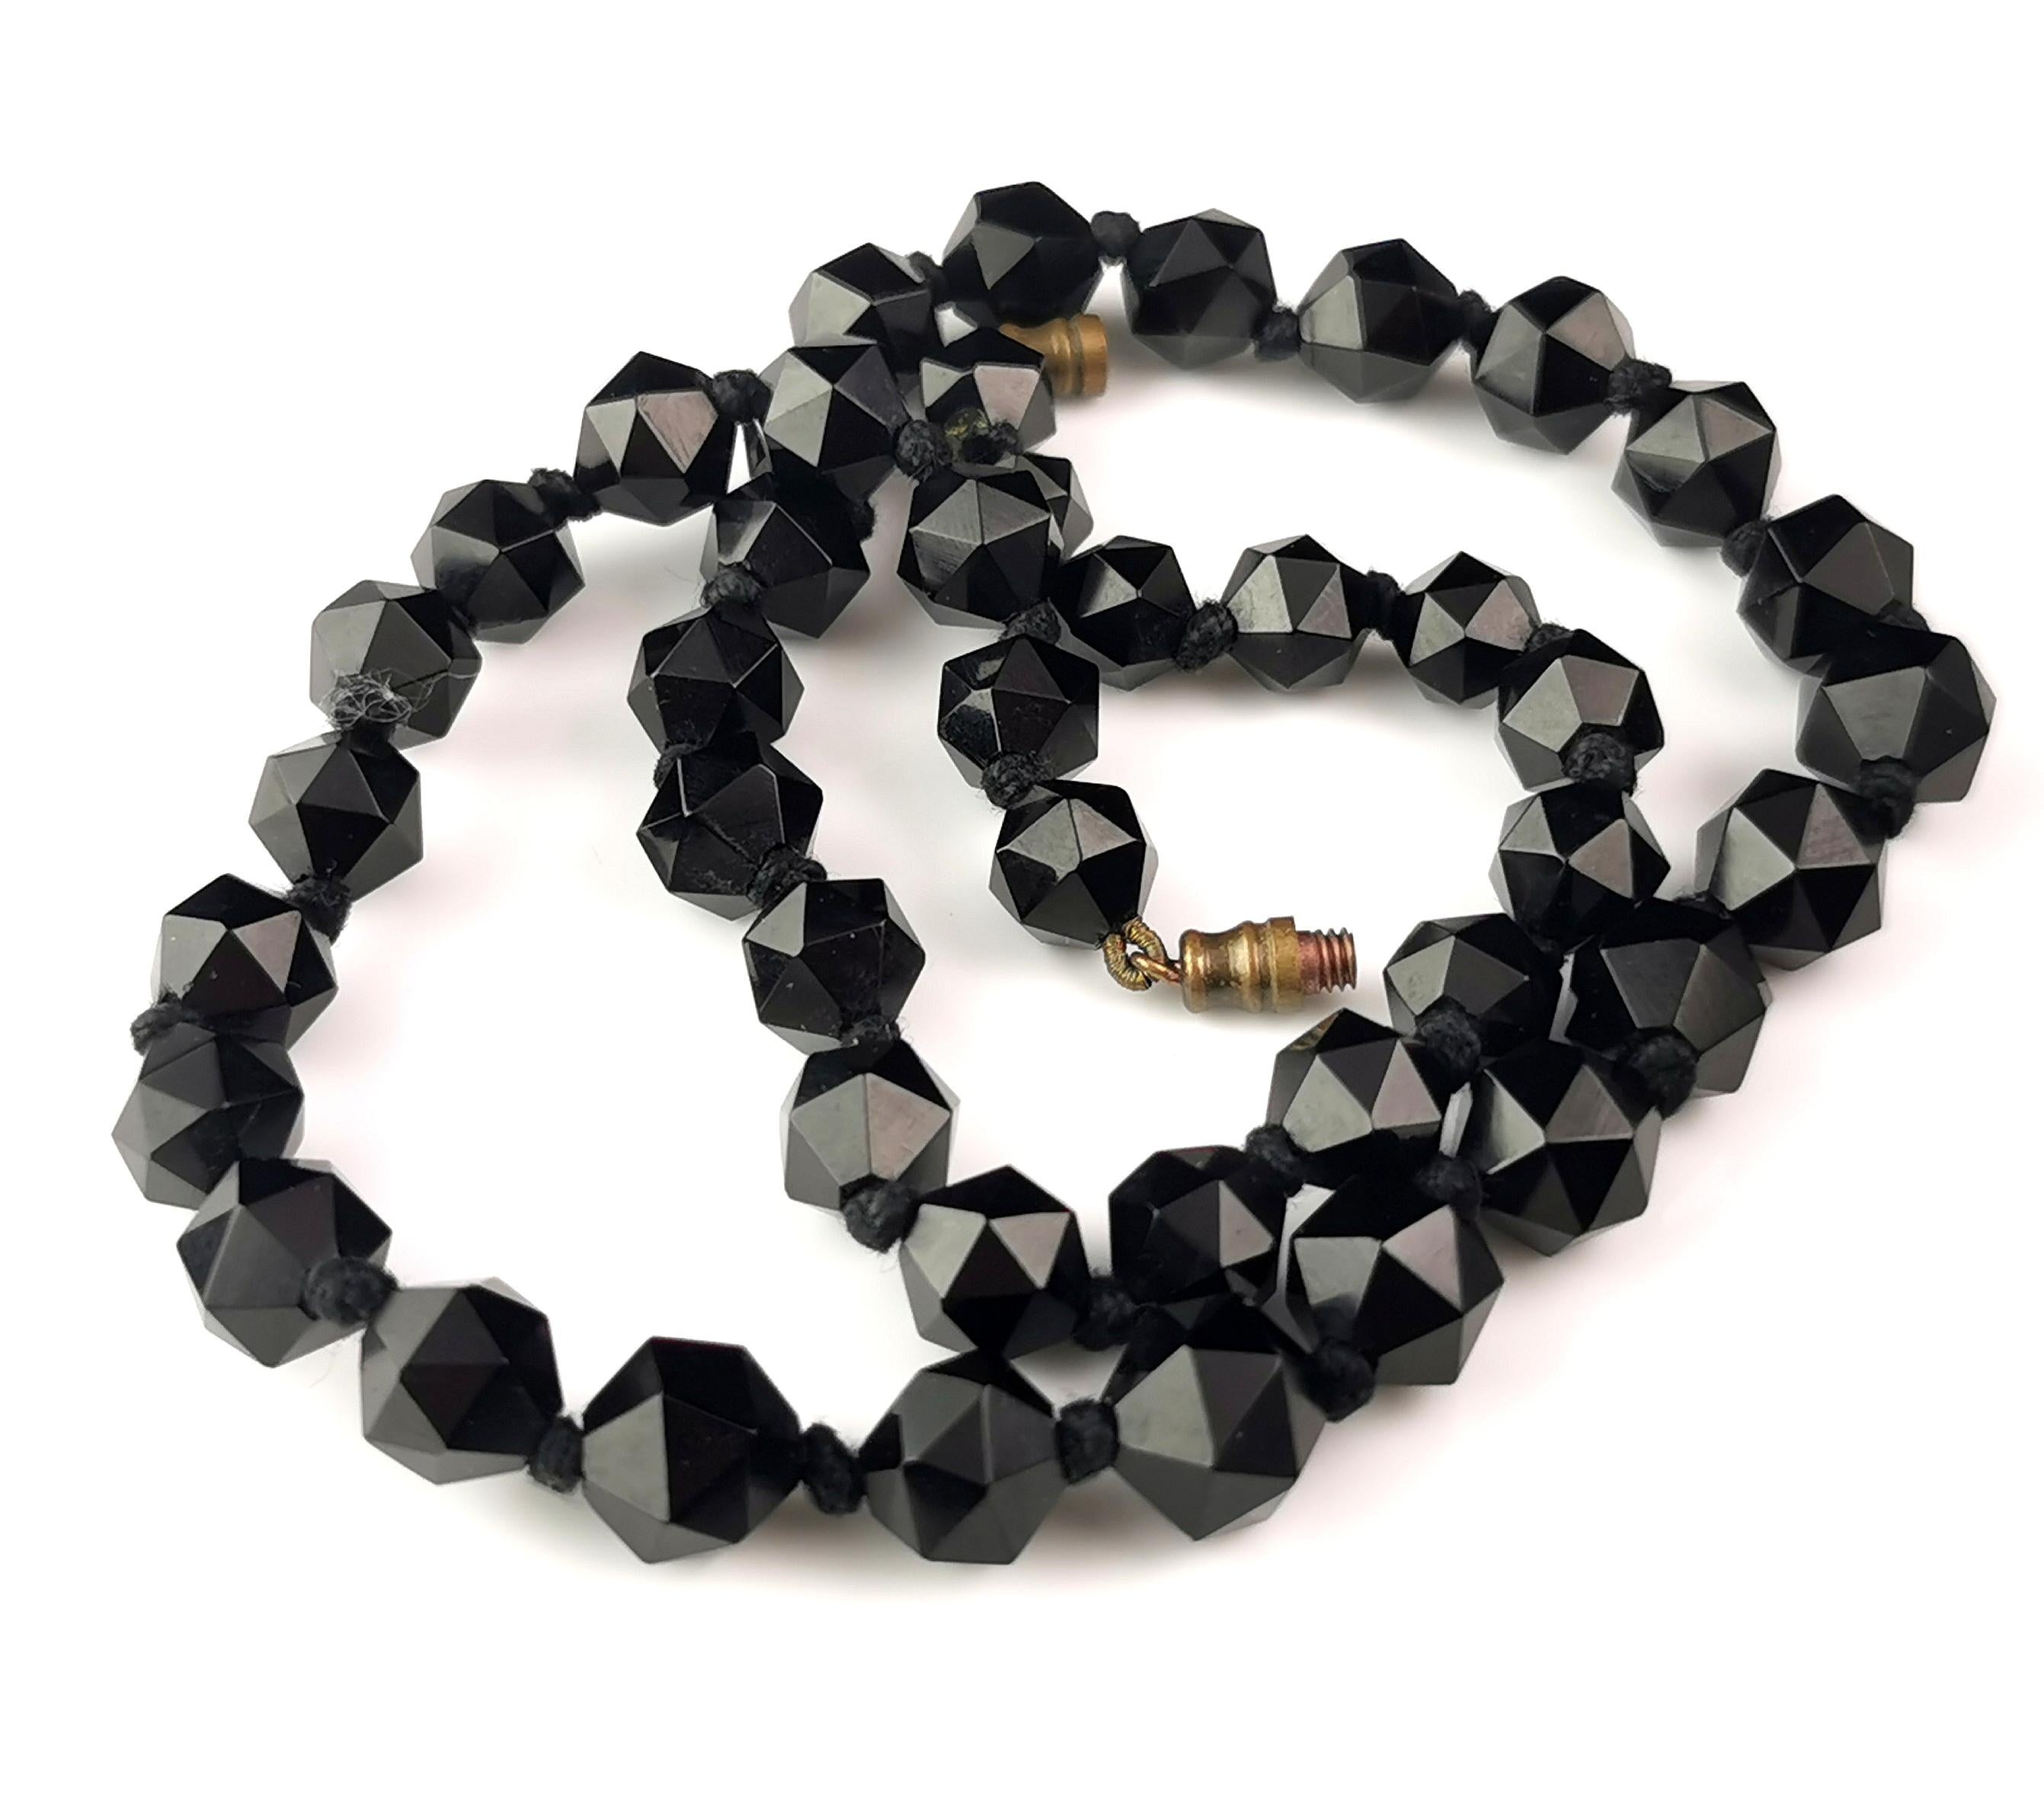 A beautiful antique very early 1920s Whitby Jet bead necklace.

It is made up from meticulously hand carved, faceted jet beads, polished to a very high shine which gives a wonderful shine and shimmer on movement.

Craftsmen were incredibly skilled